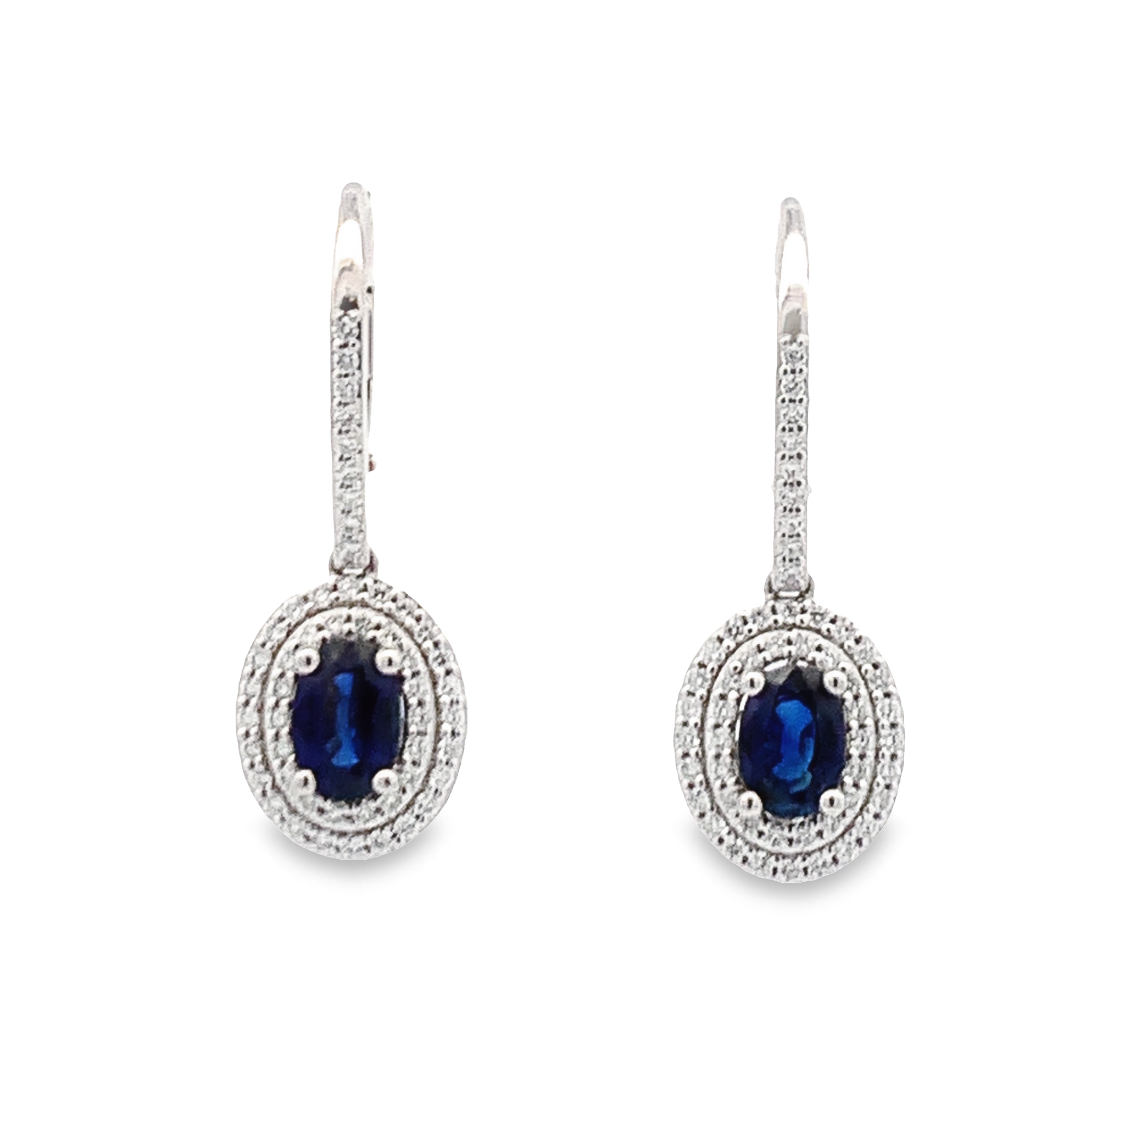 14K White Gold Leverback Earrings with Oval Sapphires